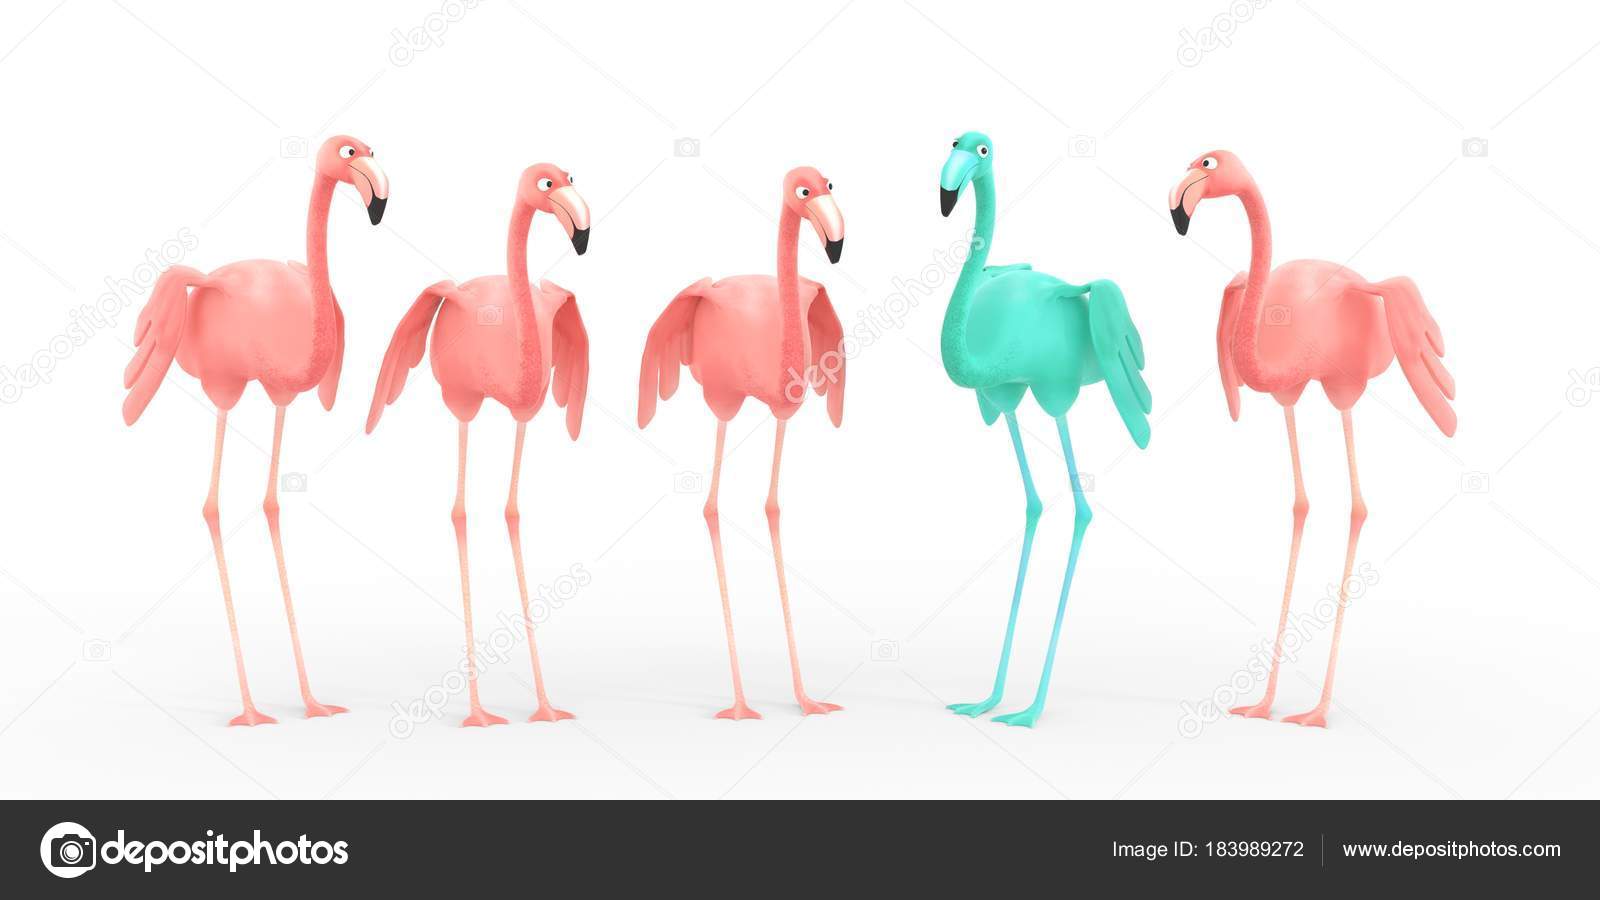 Four Pink One Green Flamingos Green New Pink Stock Photo by ©lilu_foto  183989272